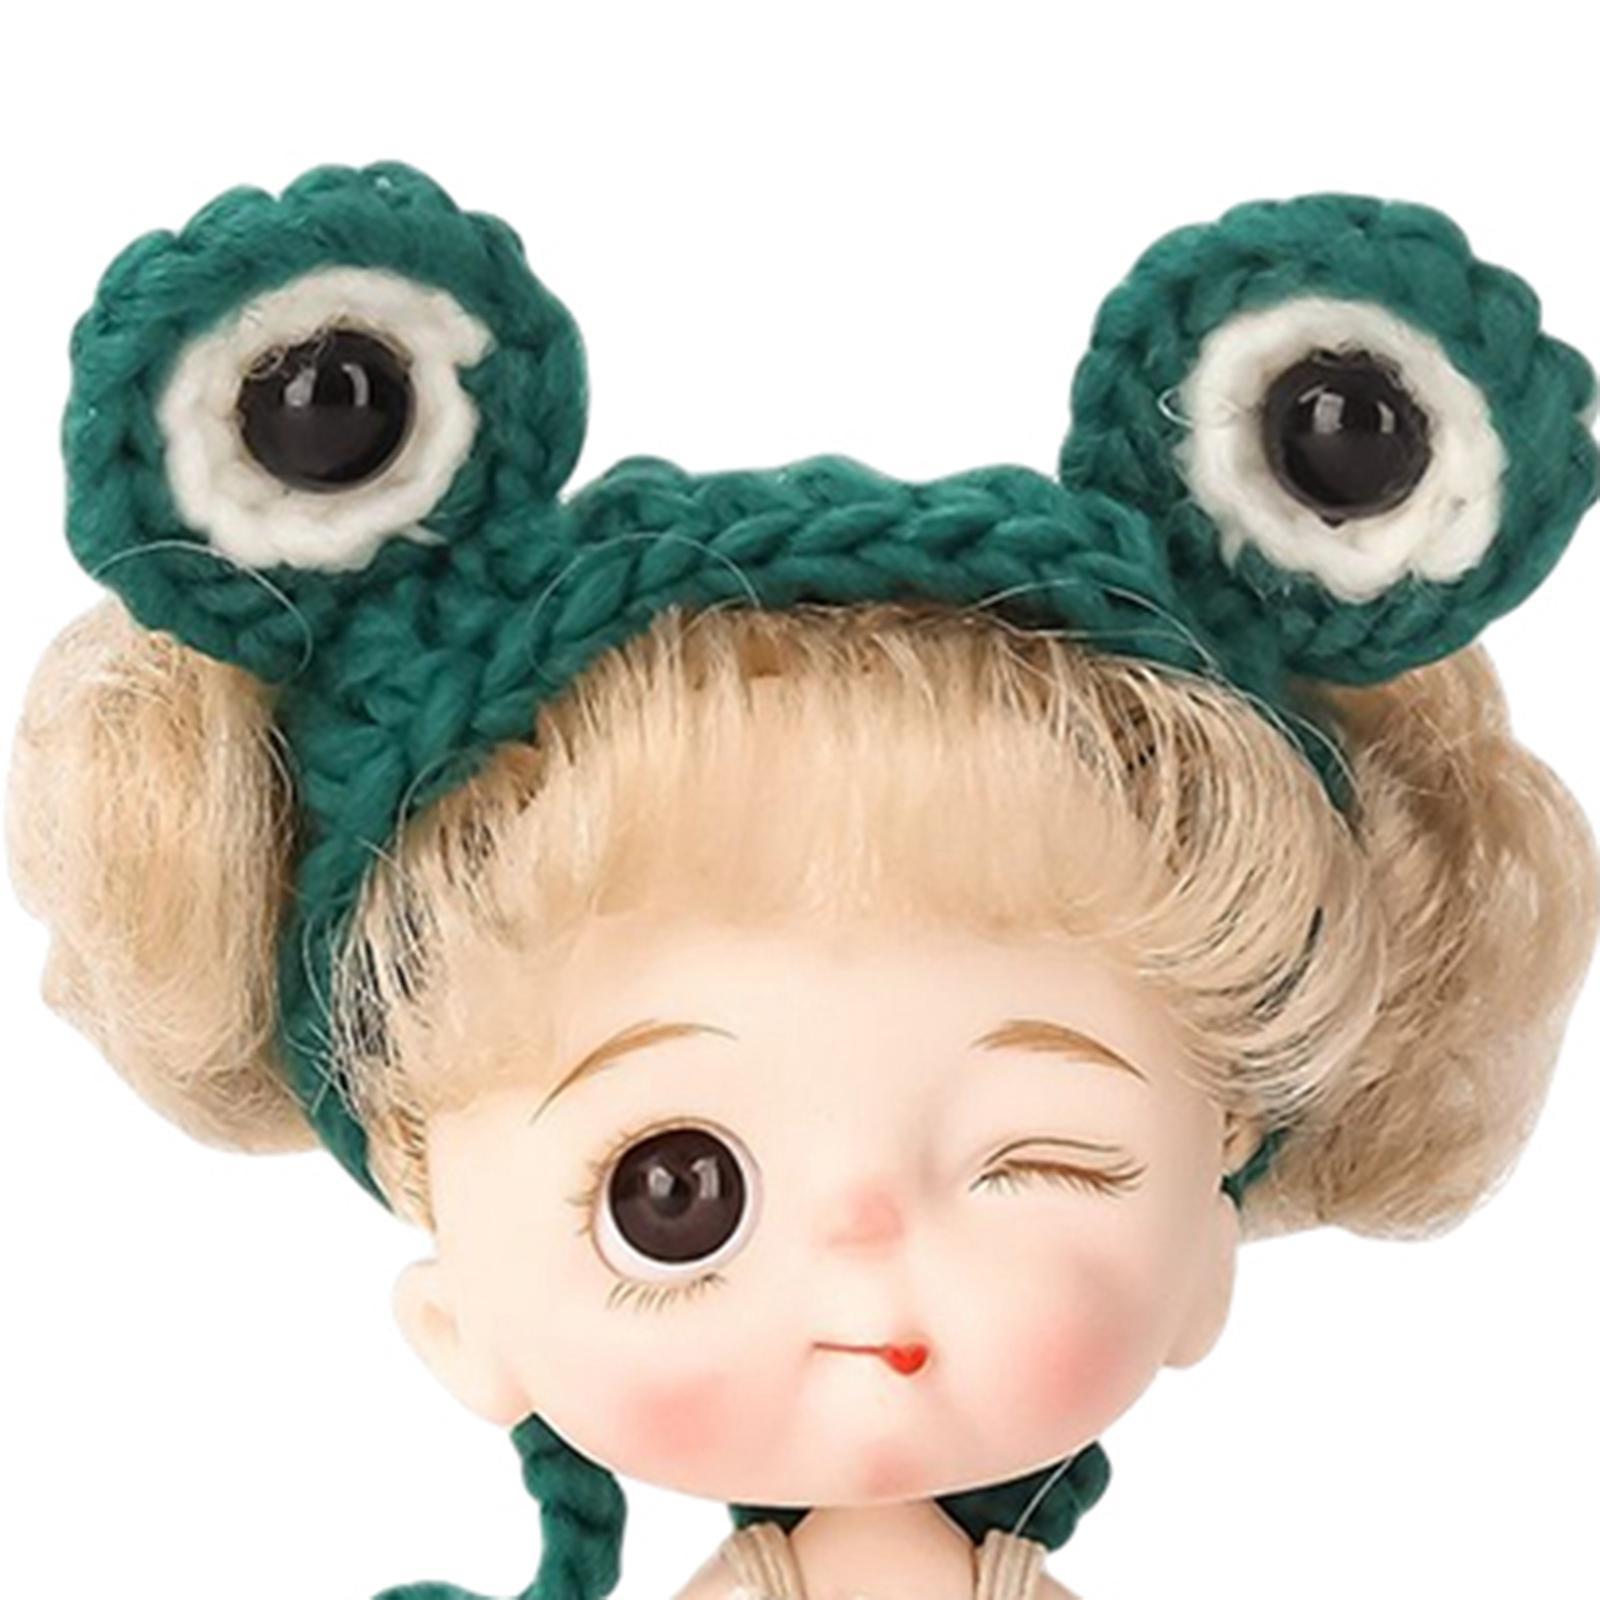 10cm 1:12 BJD Girl Doll with Dress 3D Eyes Cute Makeup for Girl Gifts Toy